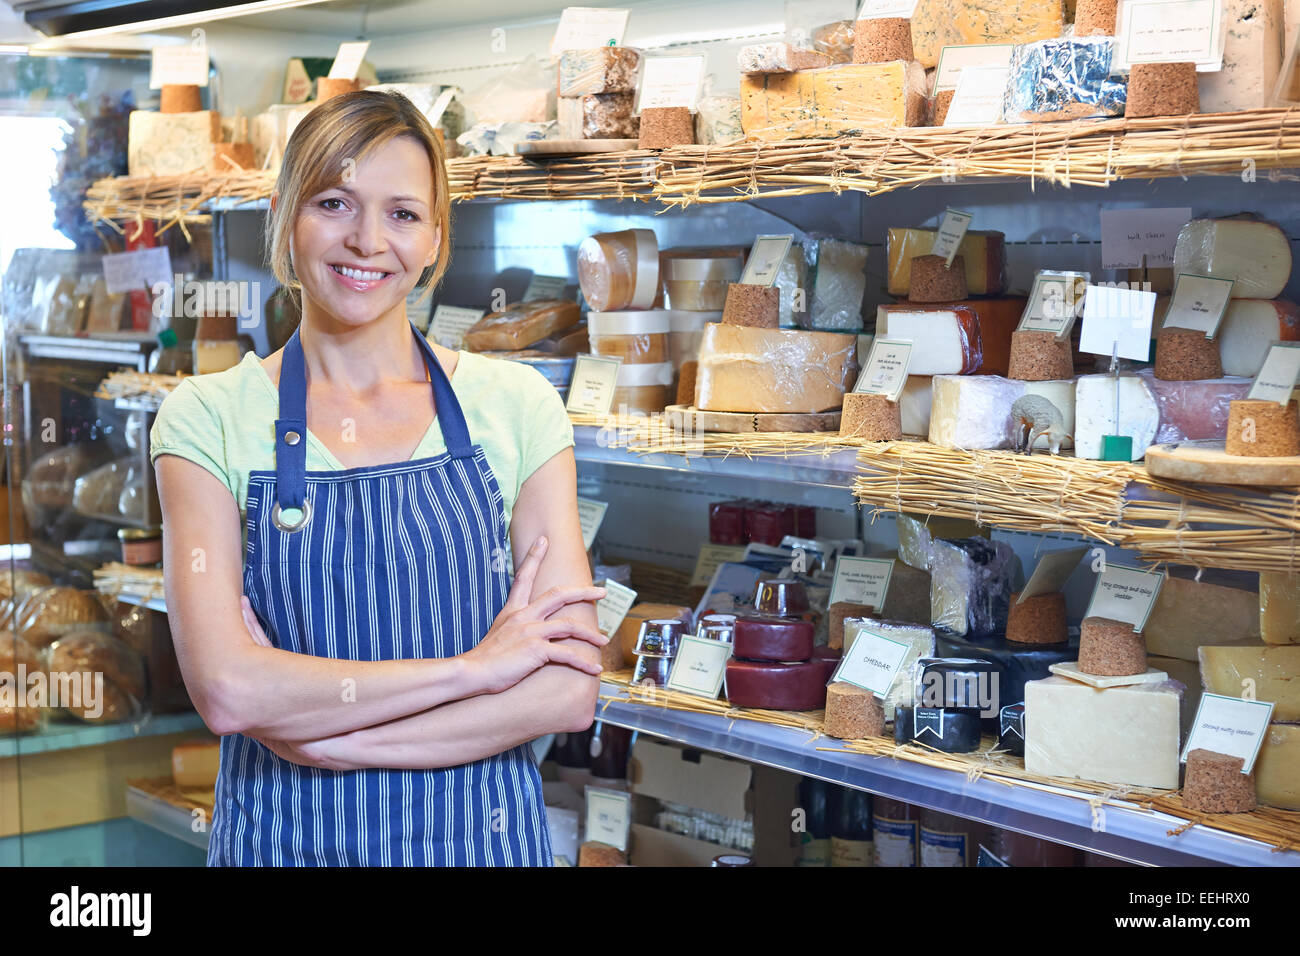 Owner Of Delicatessen Standing Next To Cheese Display Stock Photo